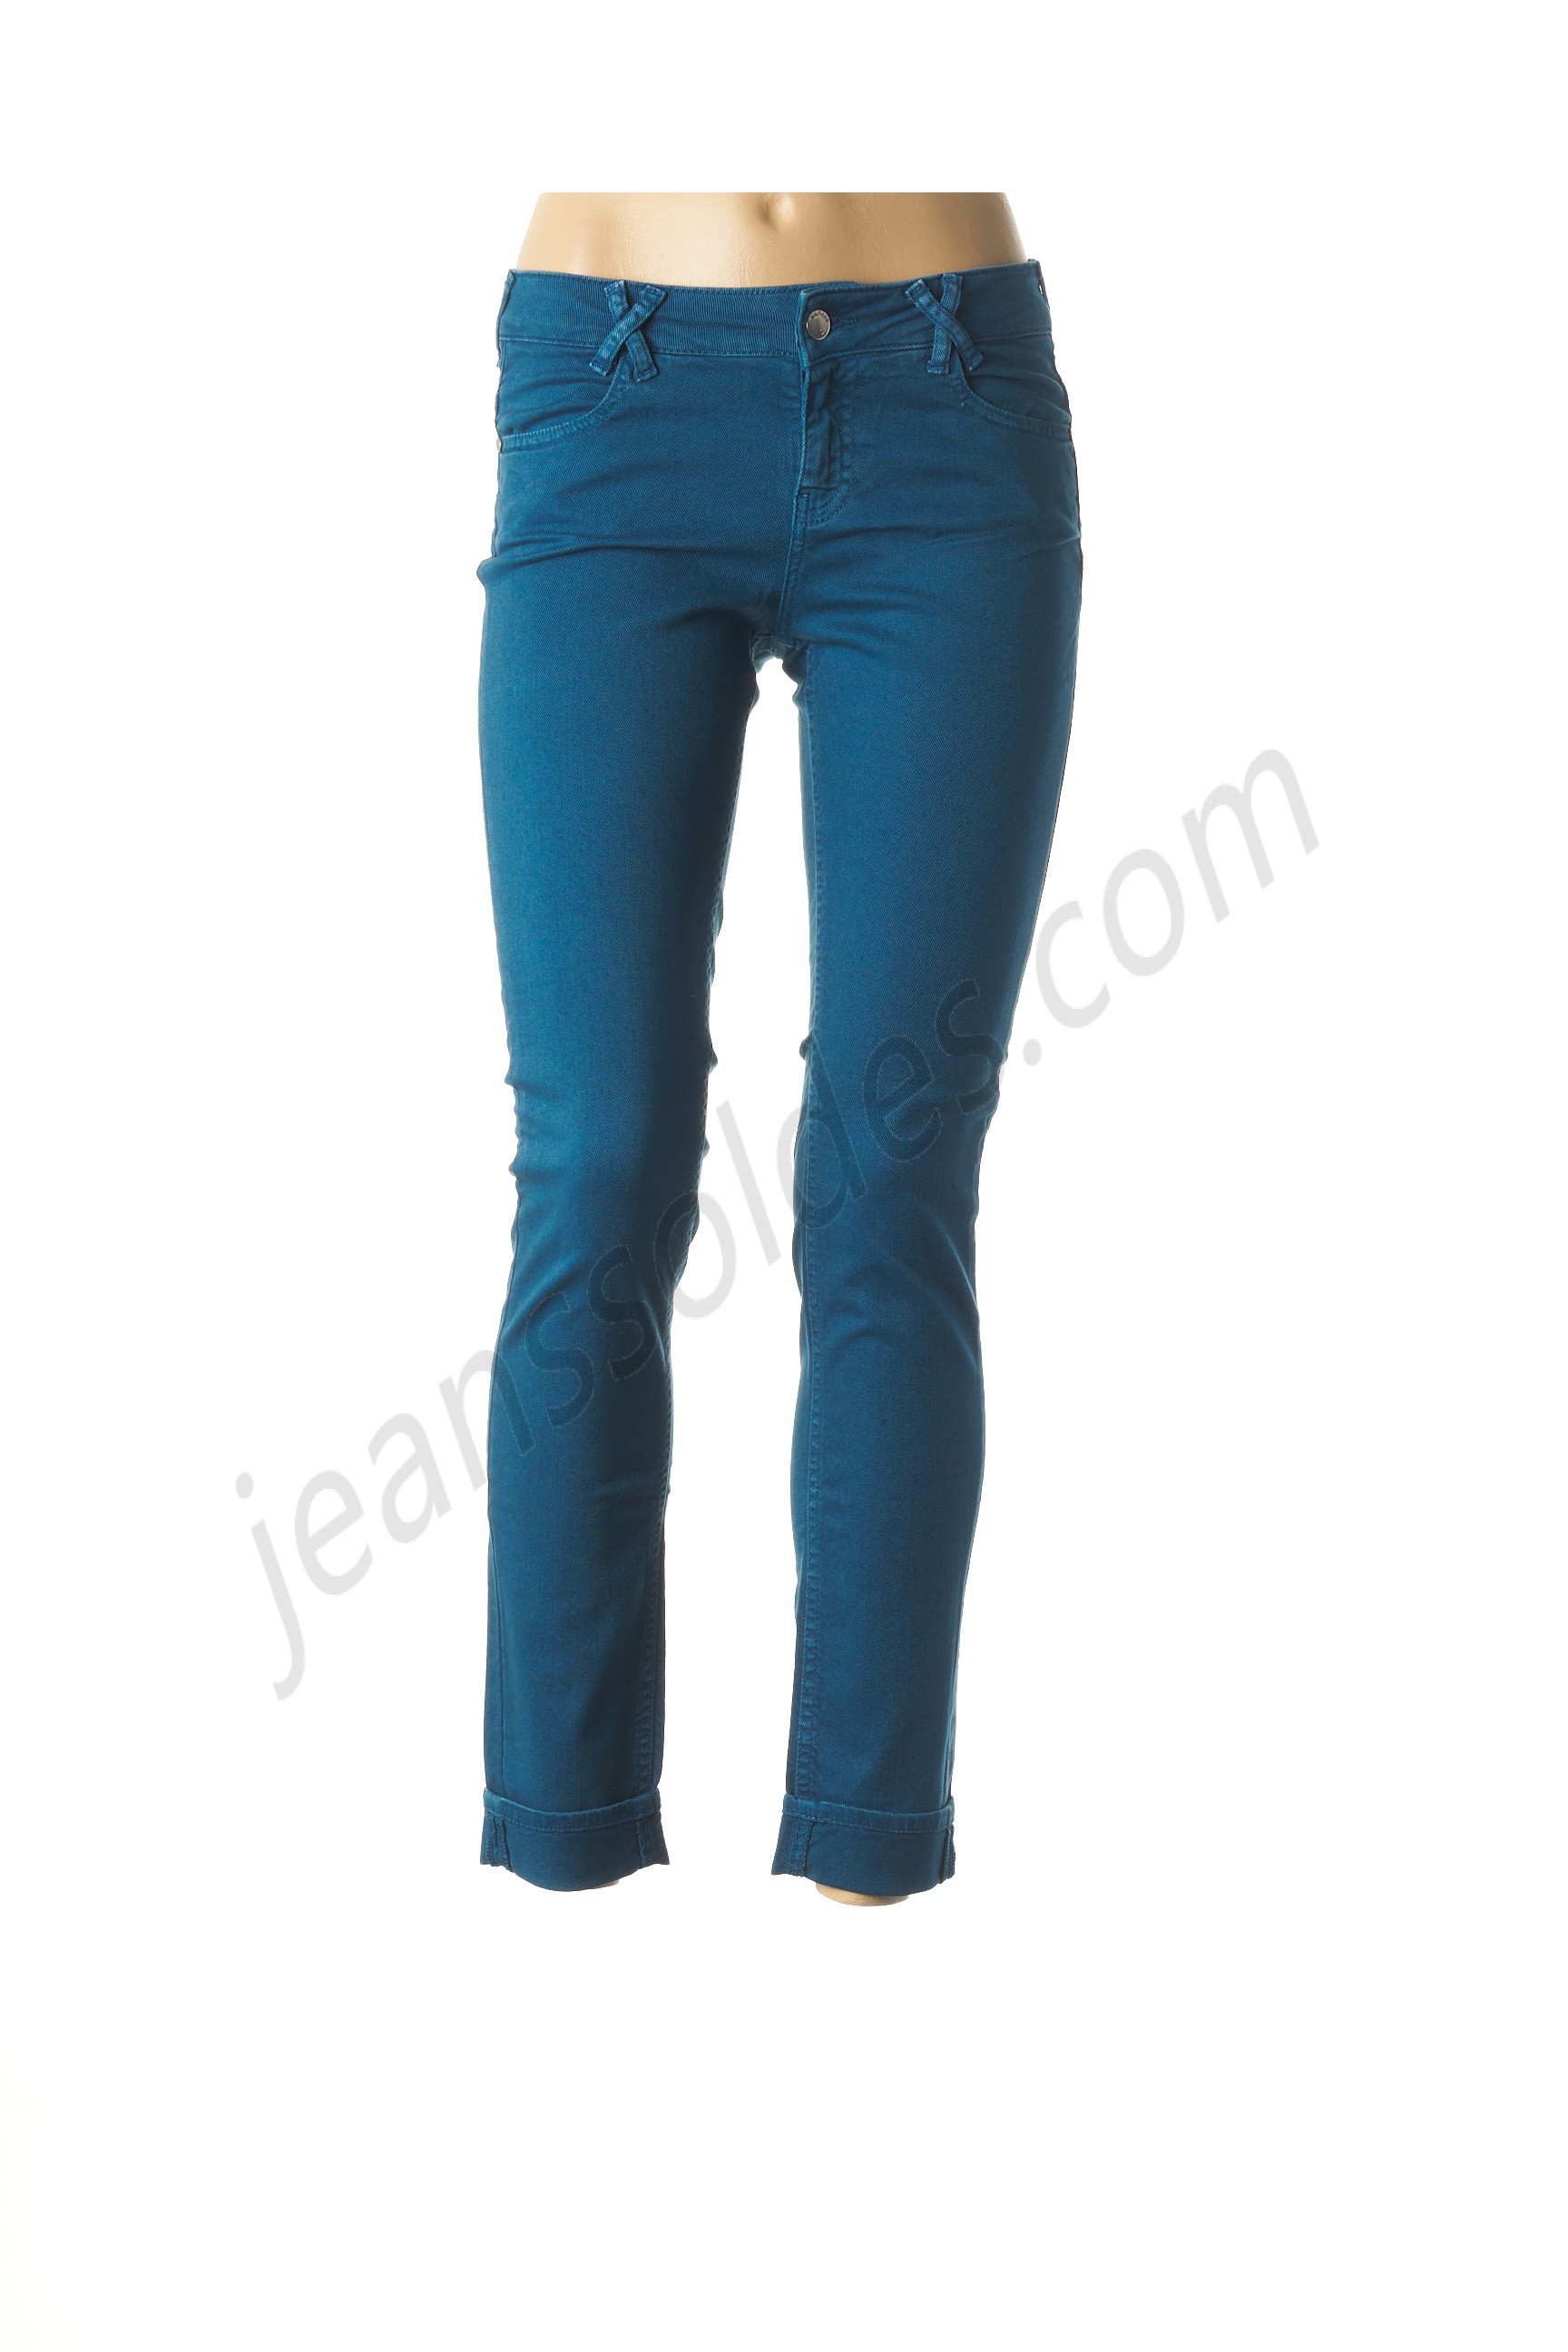 kanope-Jeans coupe slim prix d’amis - kanope-Jeans coupe slim prix d’amis